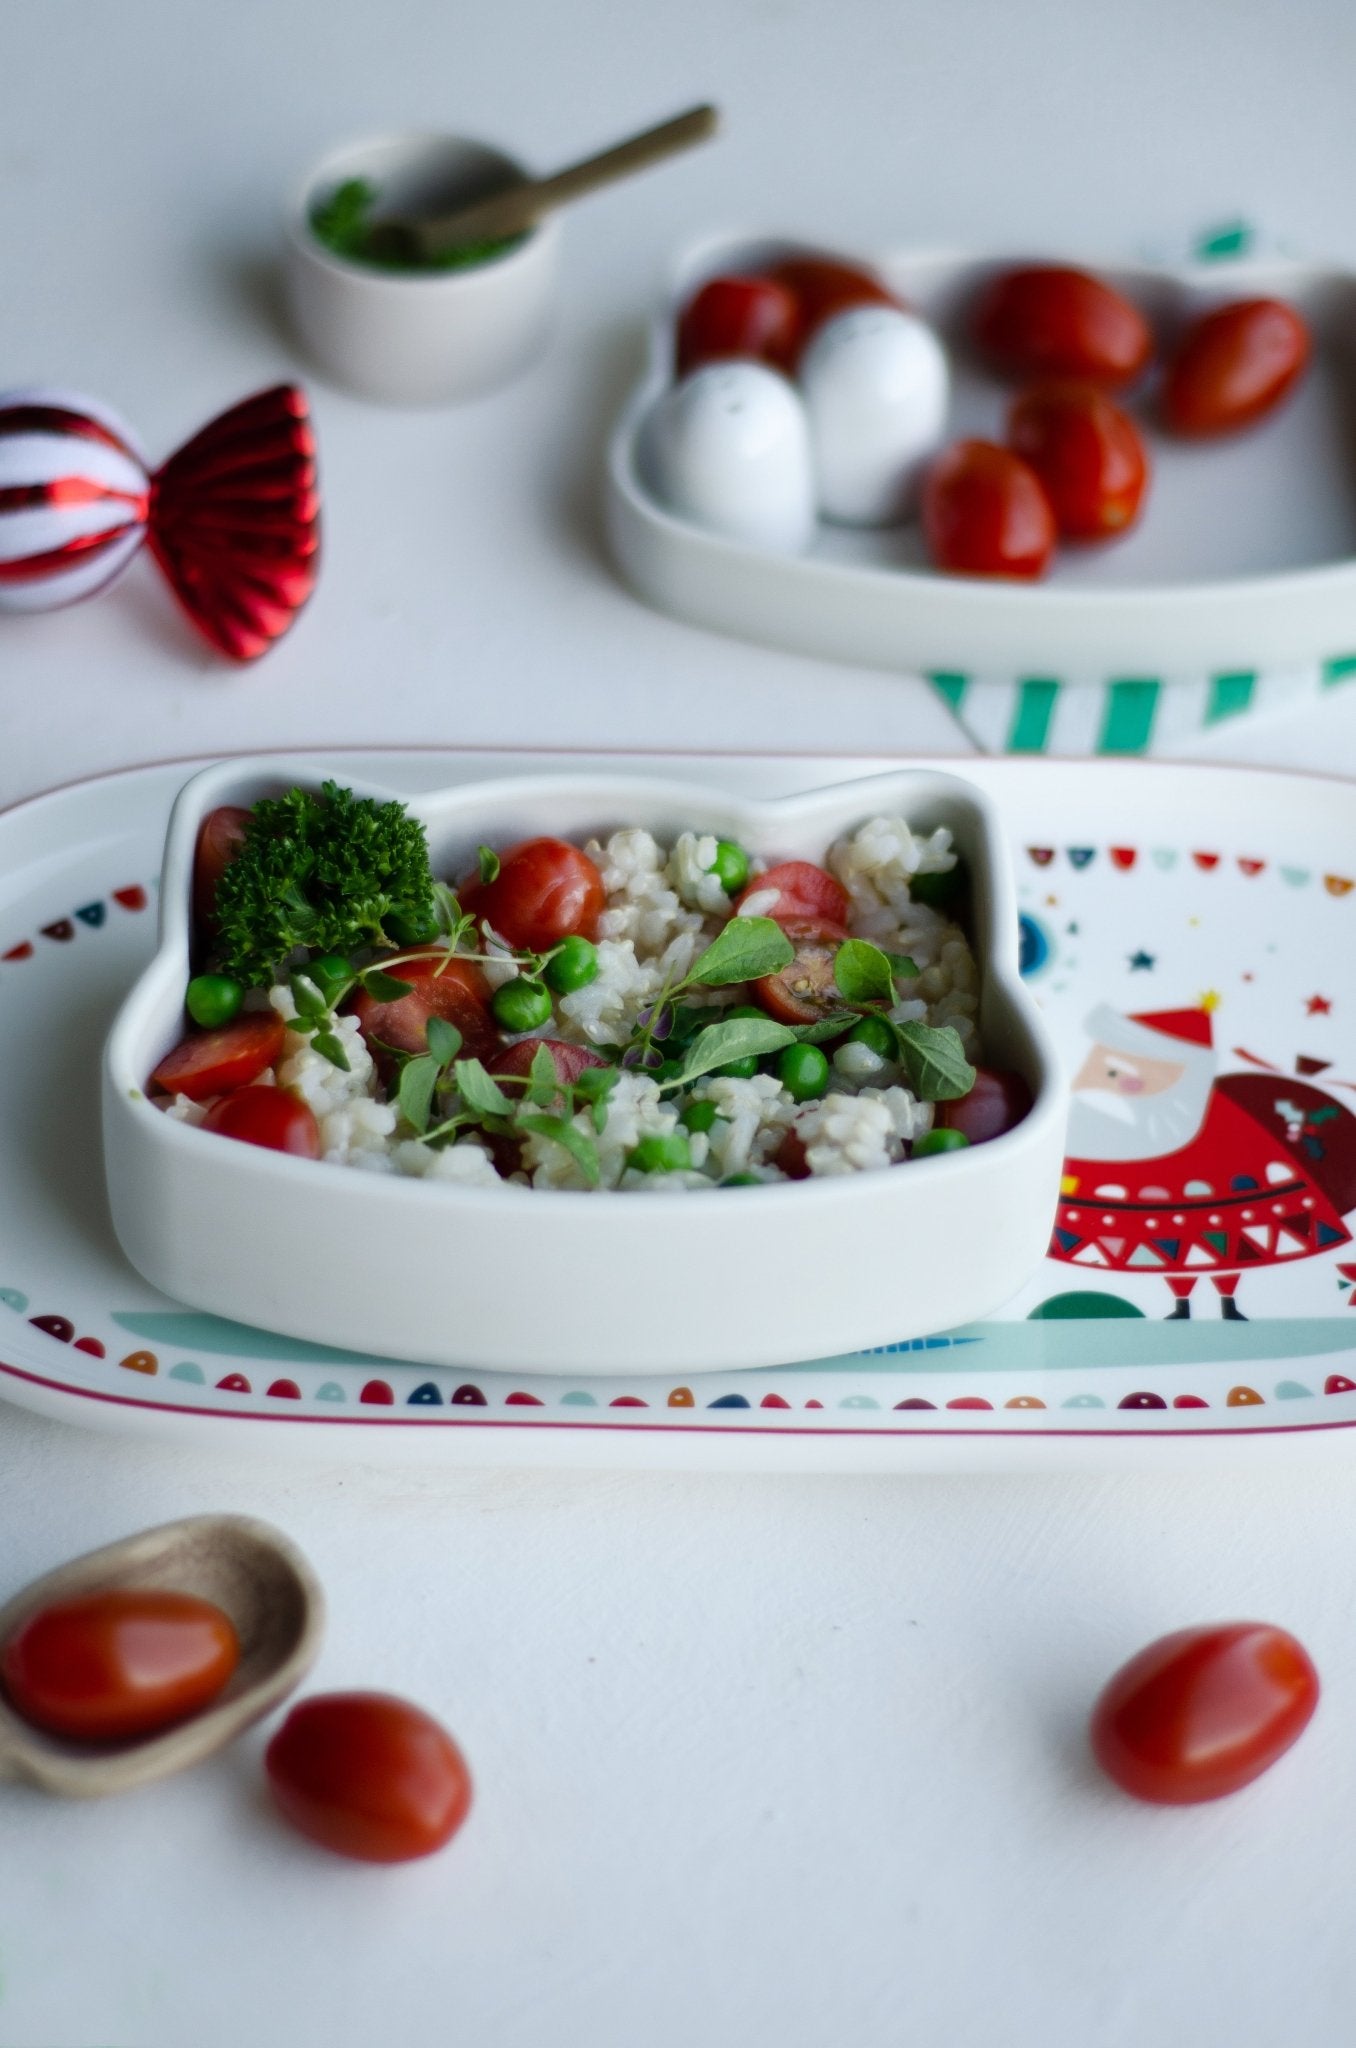 Chrissy Risotto The Perfect Addition To Your Family’s Christmas Party